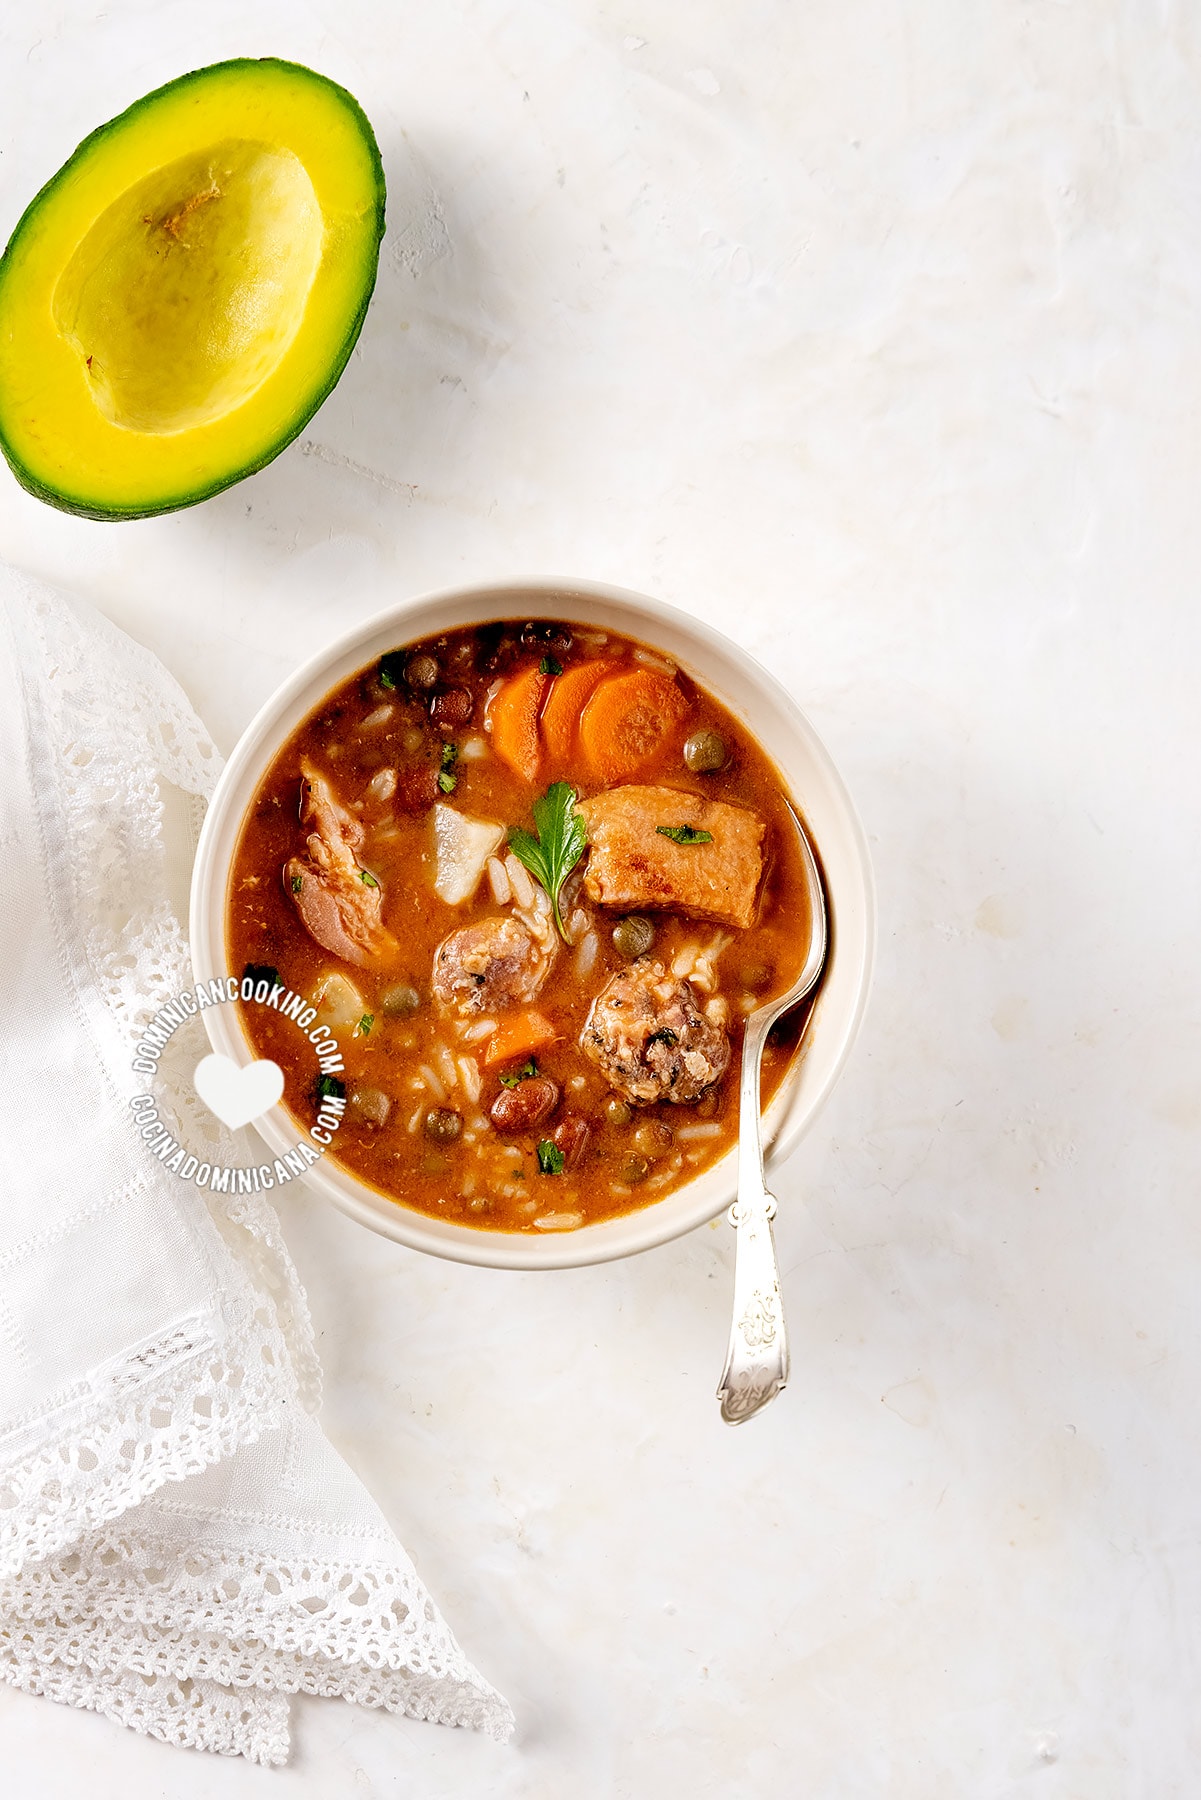 Dominican chambre (rice and beans stew)